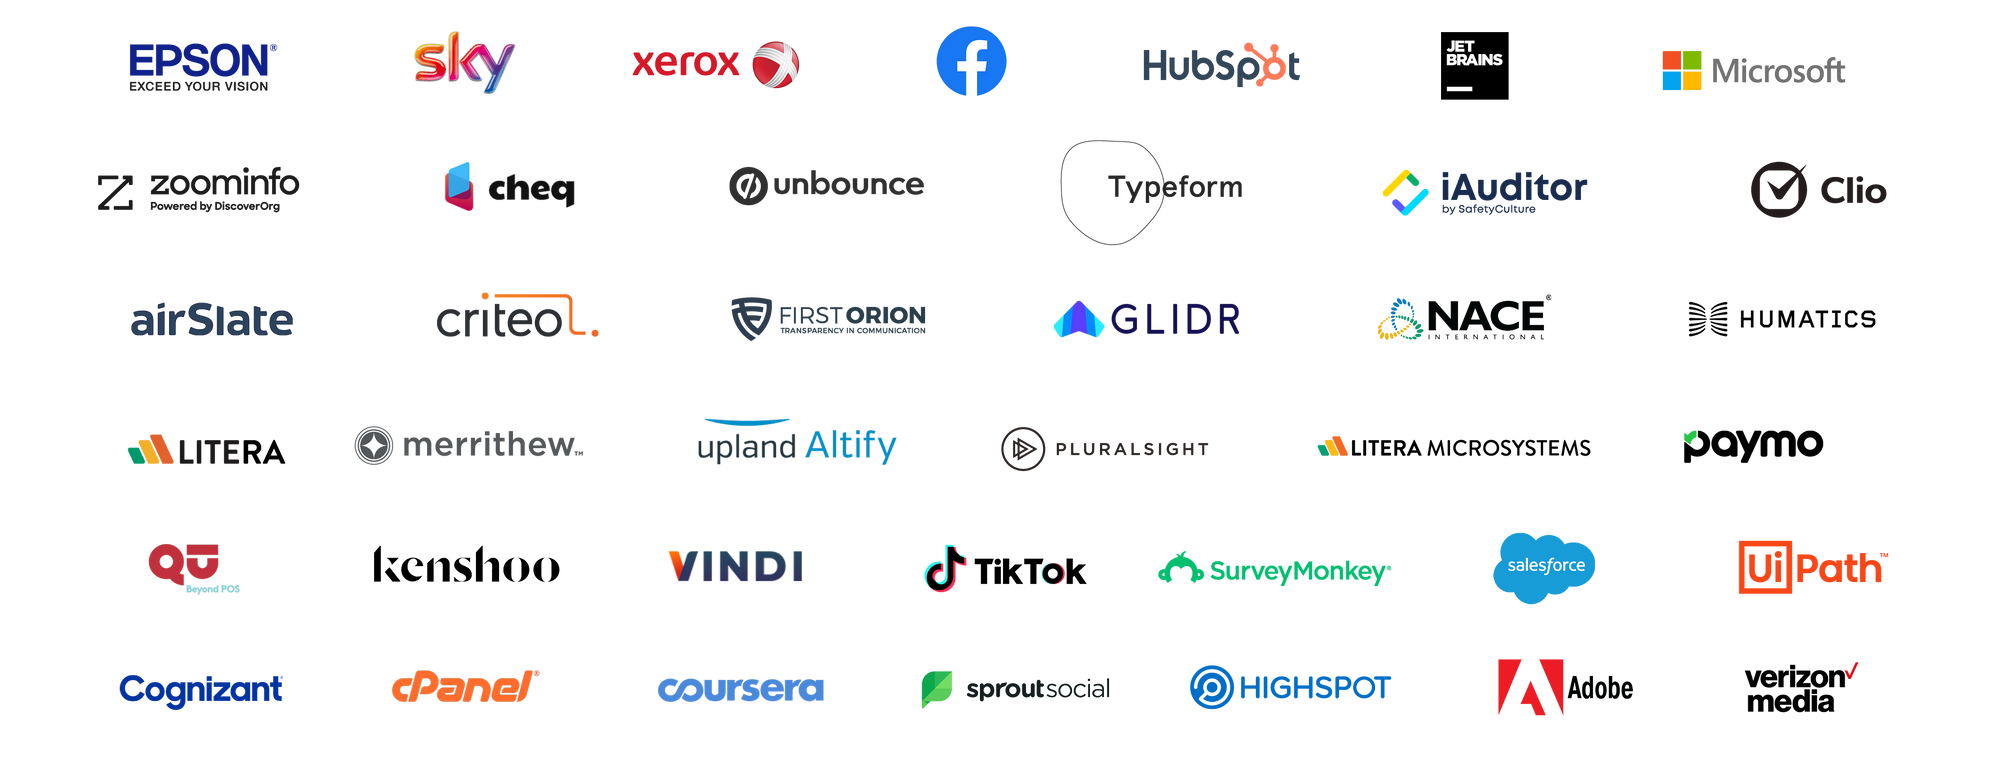 Product Marketing Core is trustedby the likes of HunSpot, Sky, Facebook, and many more market leaders.